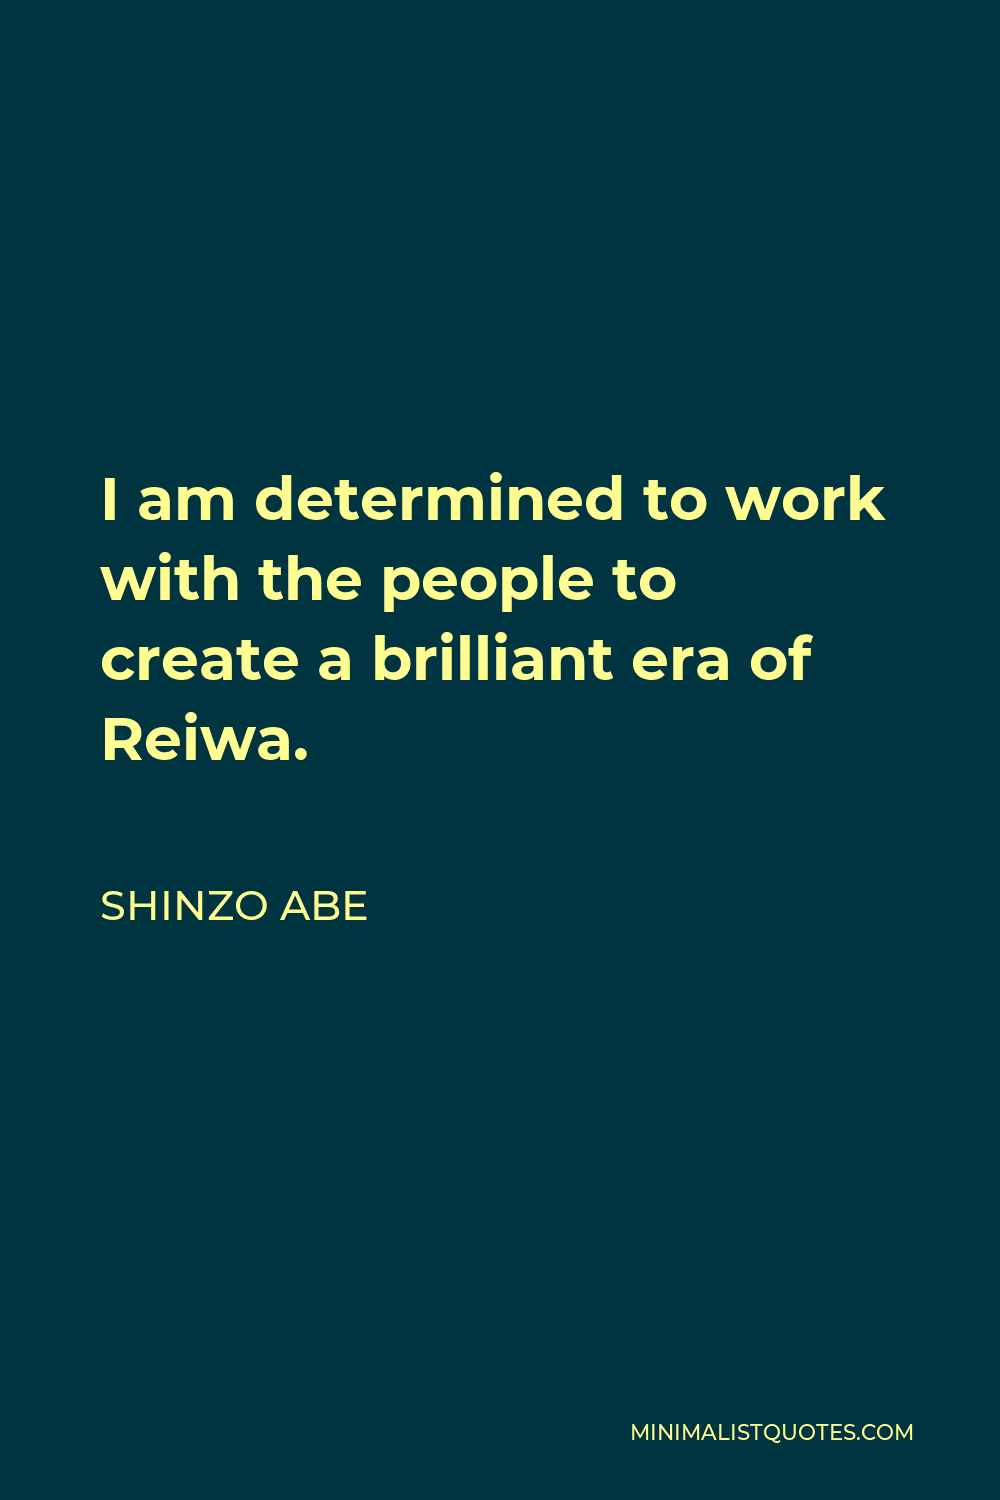 Shinzo Abe Quote - I am determined to work with the people to create a brilliant era of Reiwa.